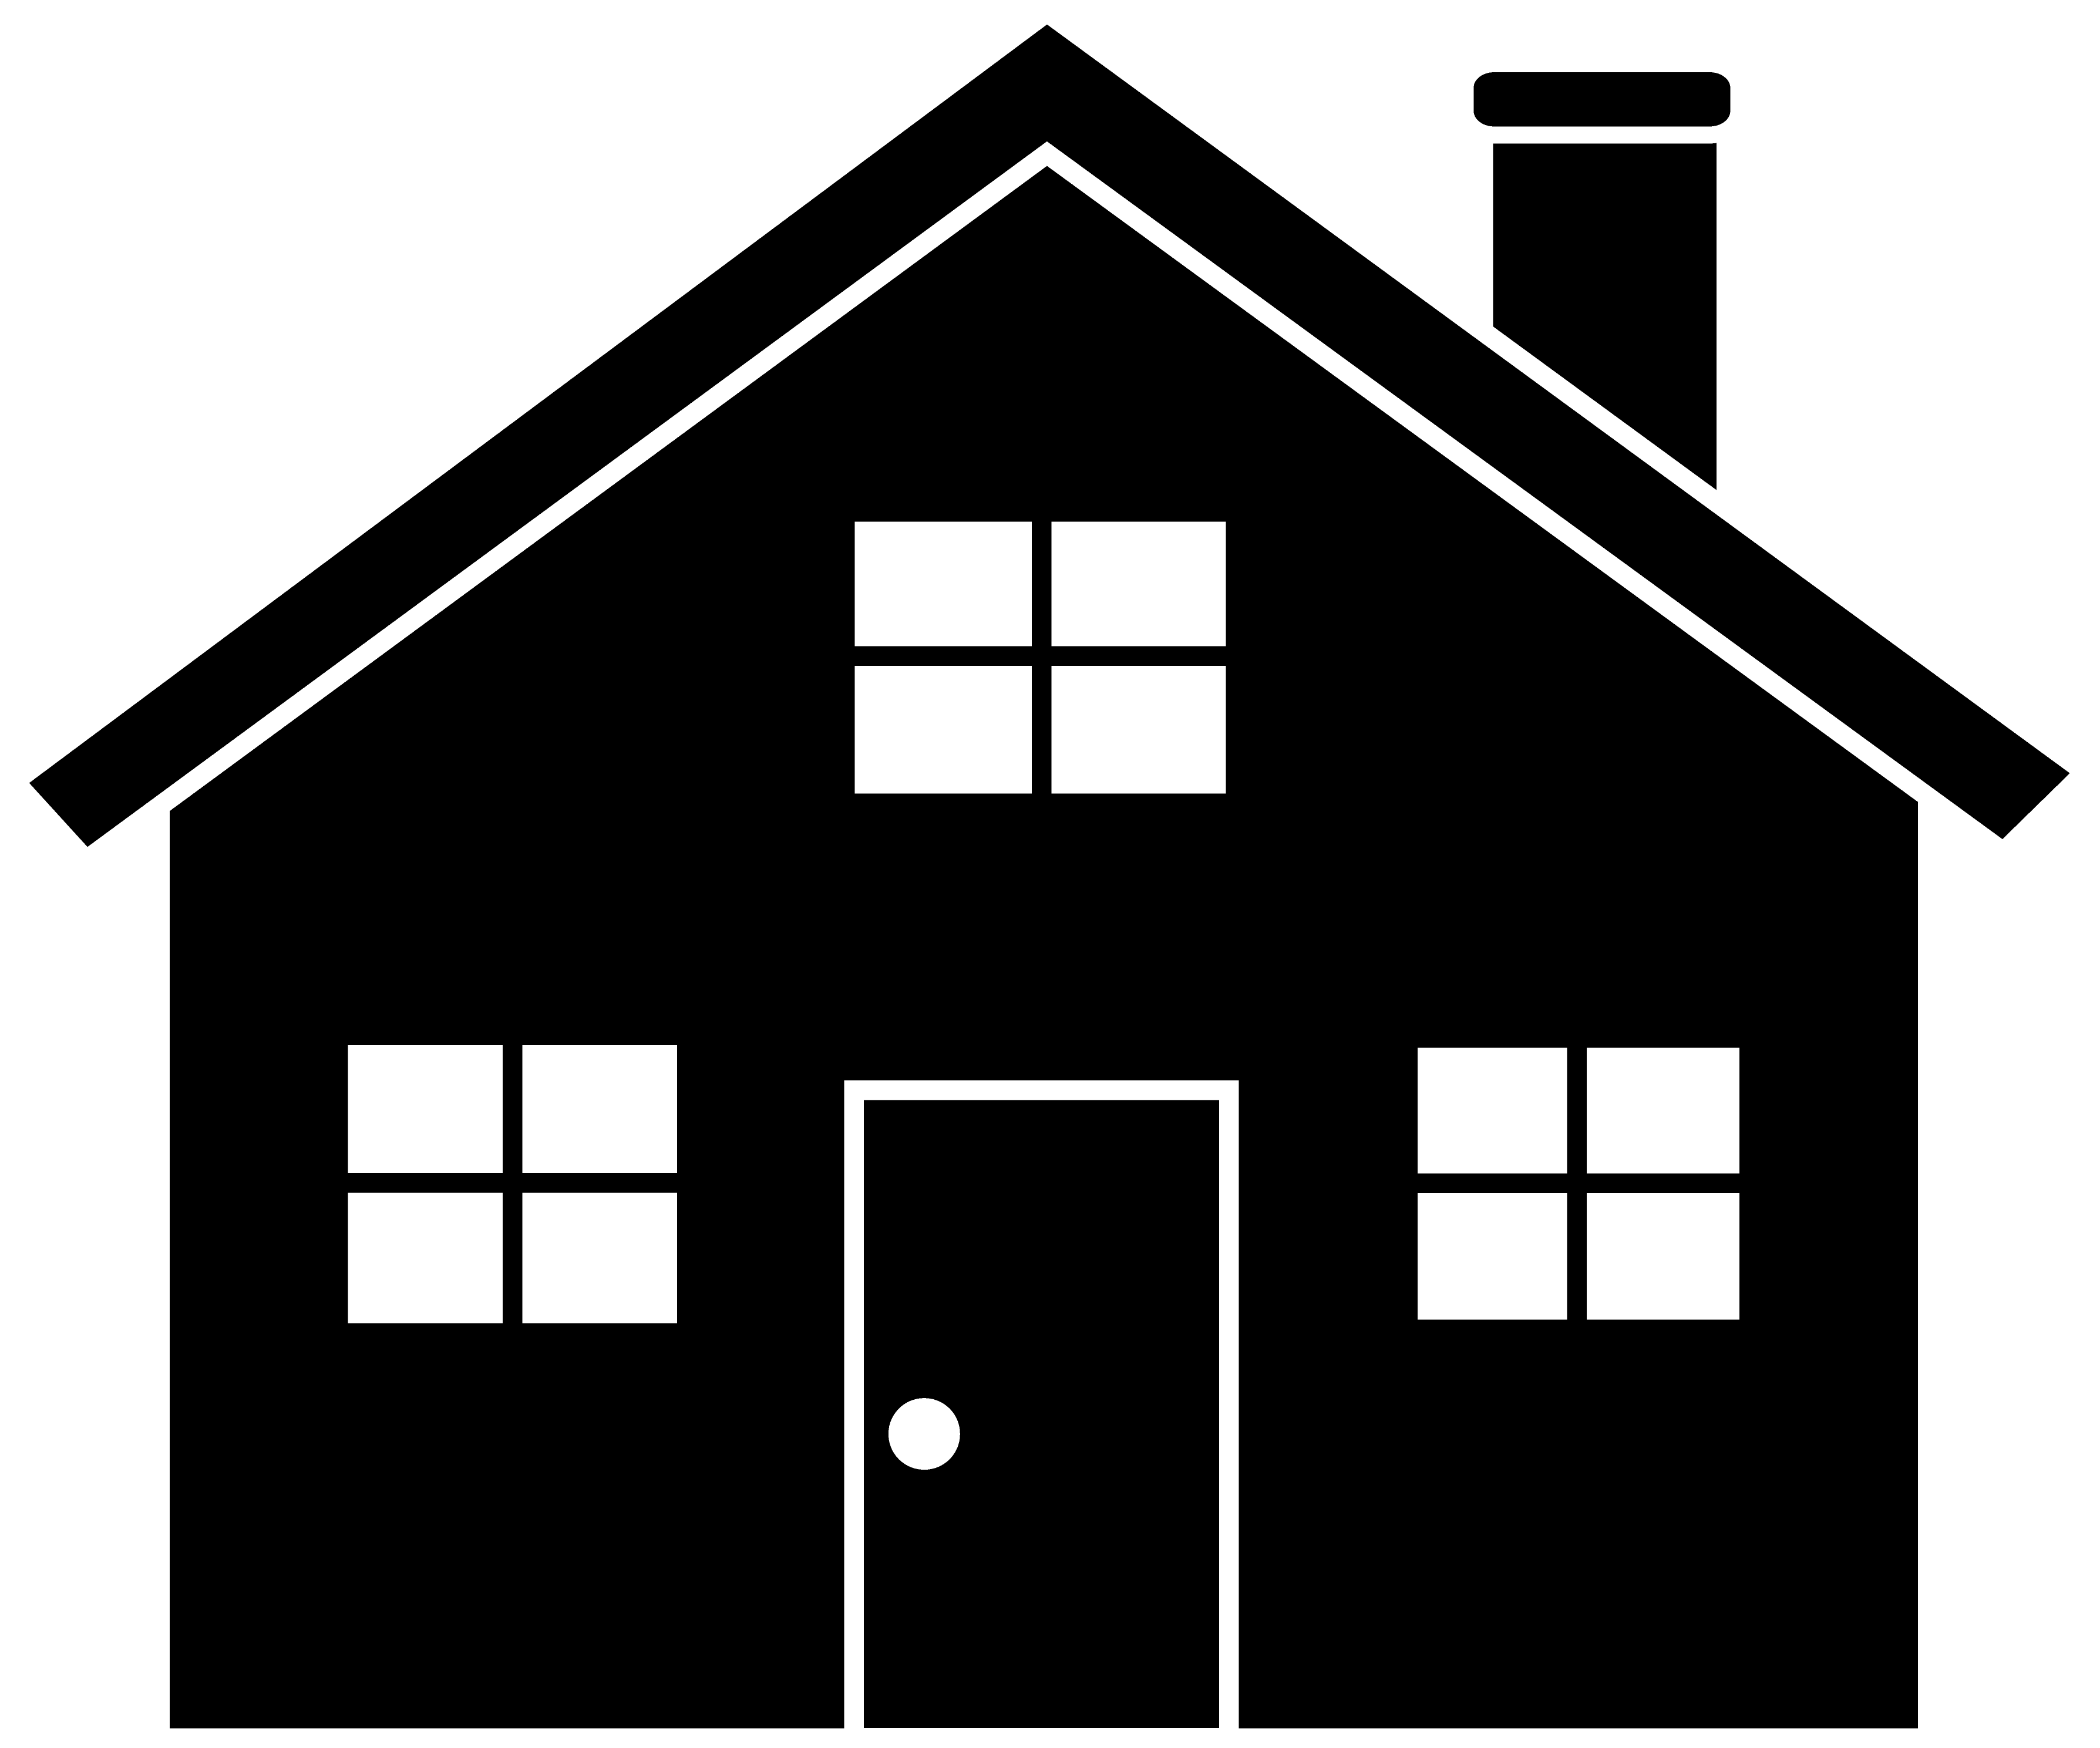 Clipart boy house. Image of black background